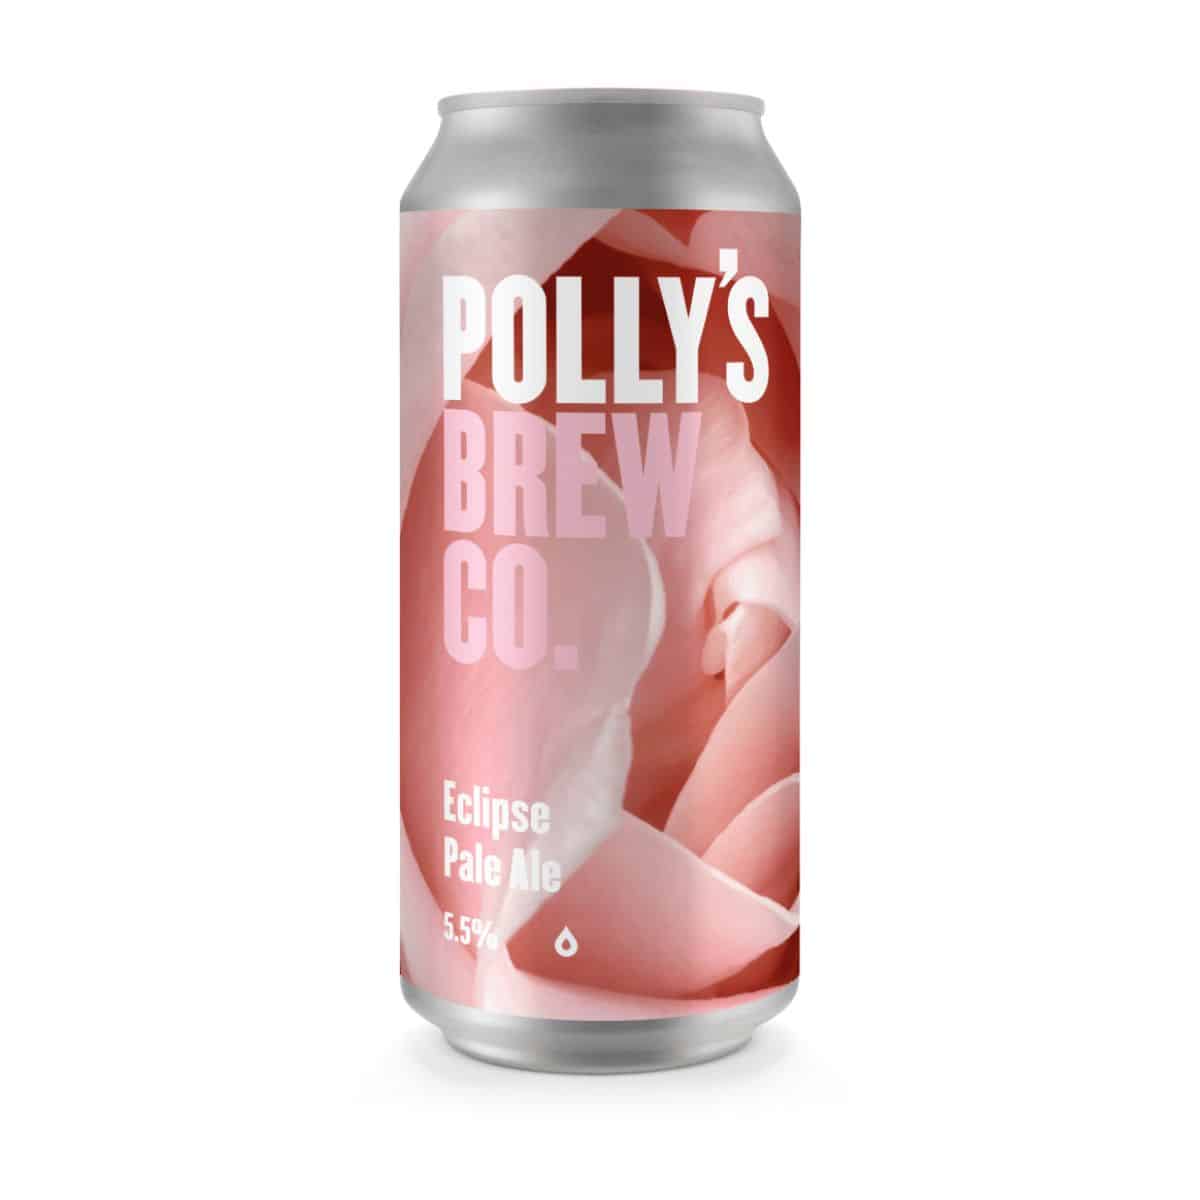 Pollys Eclipse